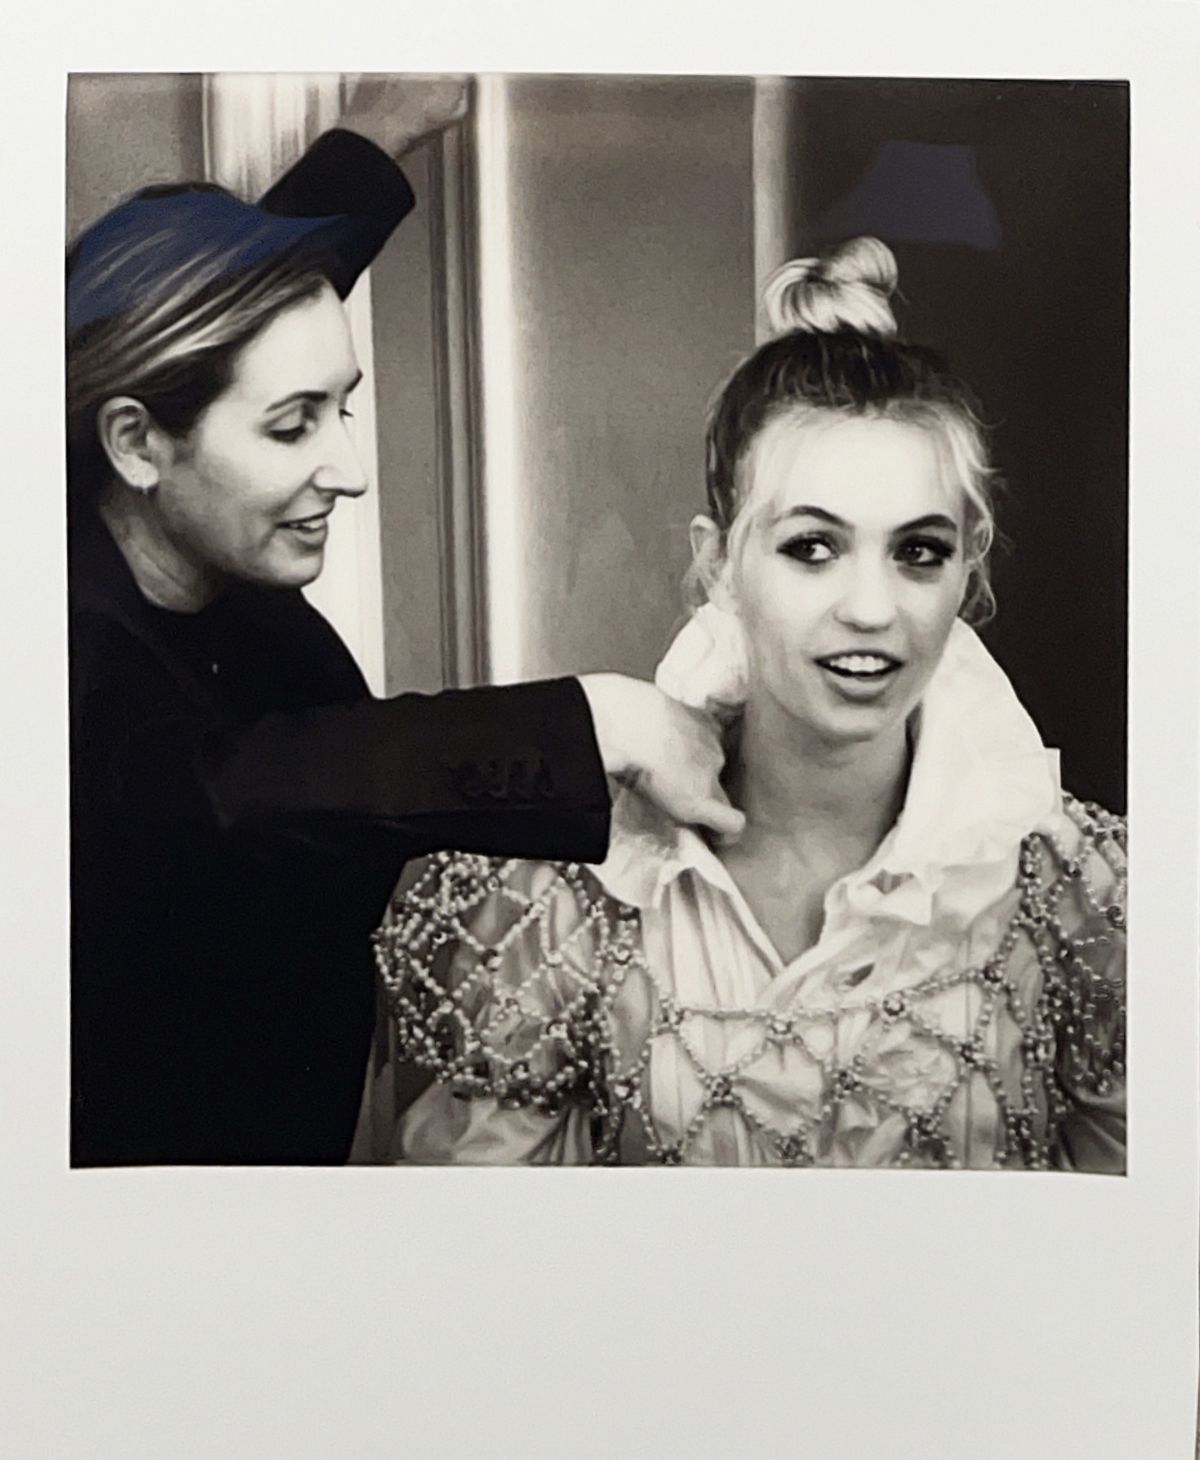 <p>"This is my incredible stylist Erica Cloud sewing me into my dress. A very underrated part of styling."</p>
                            